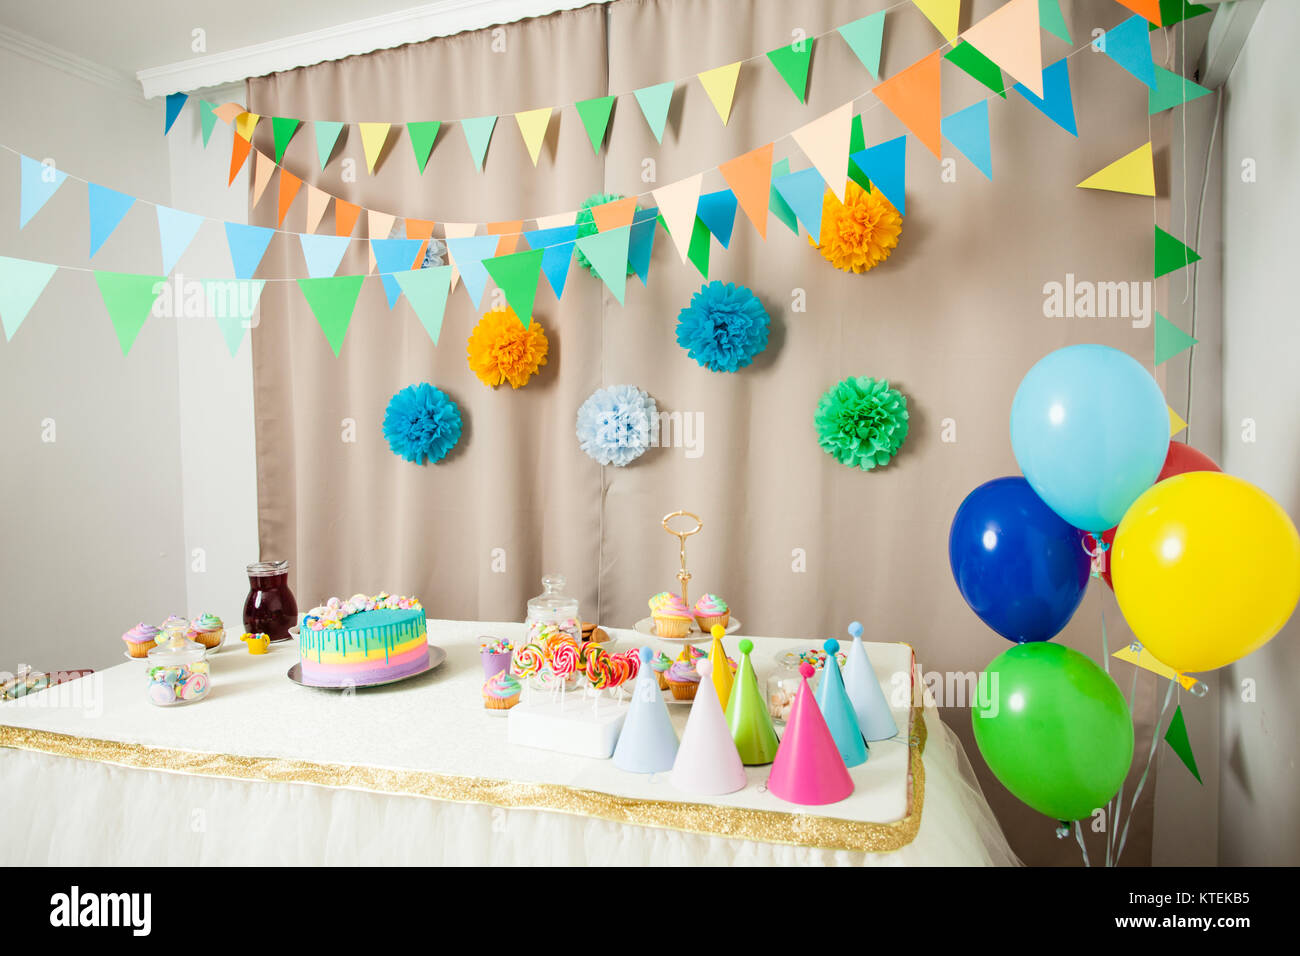 Decorated table in the room for Happy Birthday Party without ...